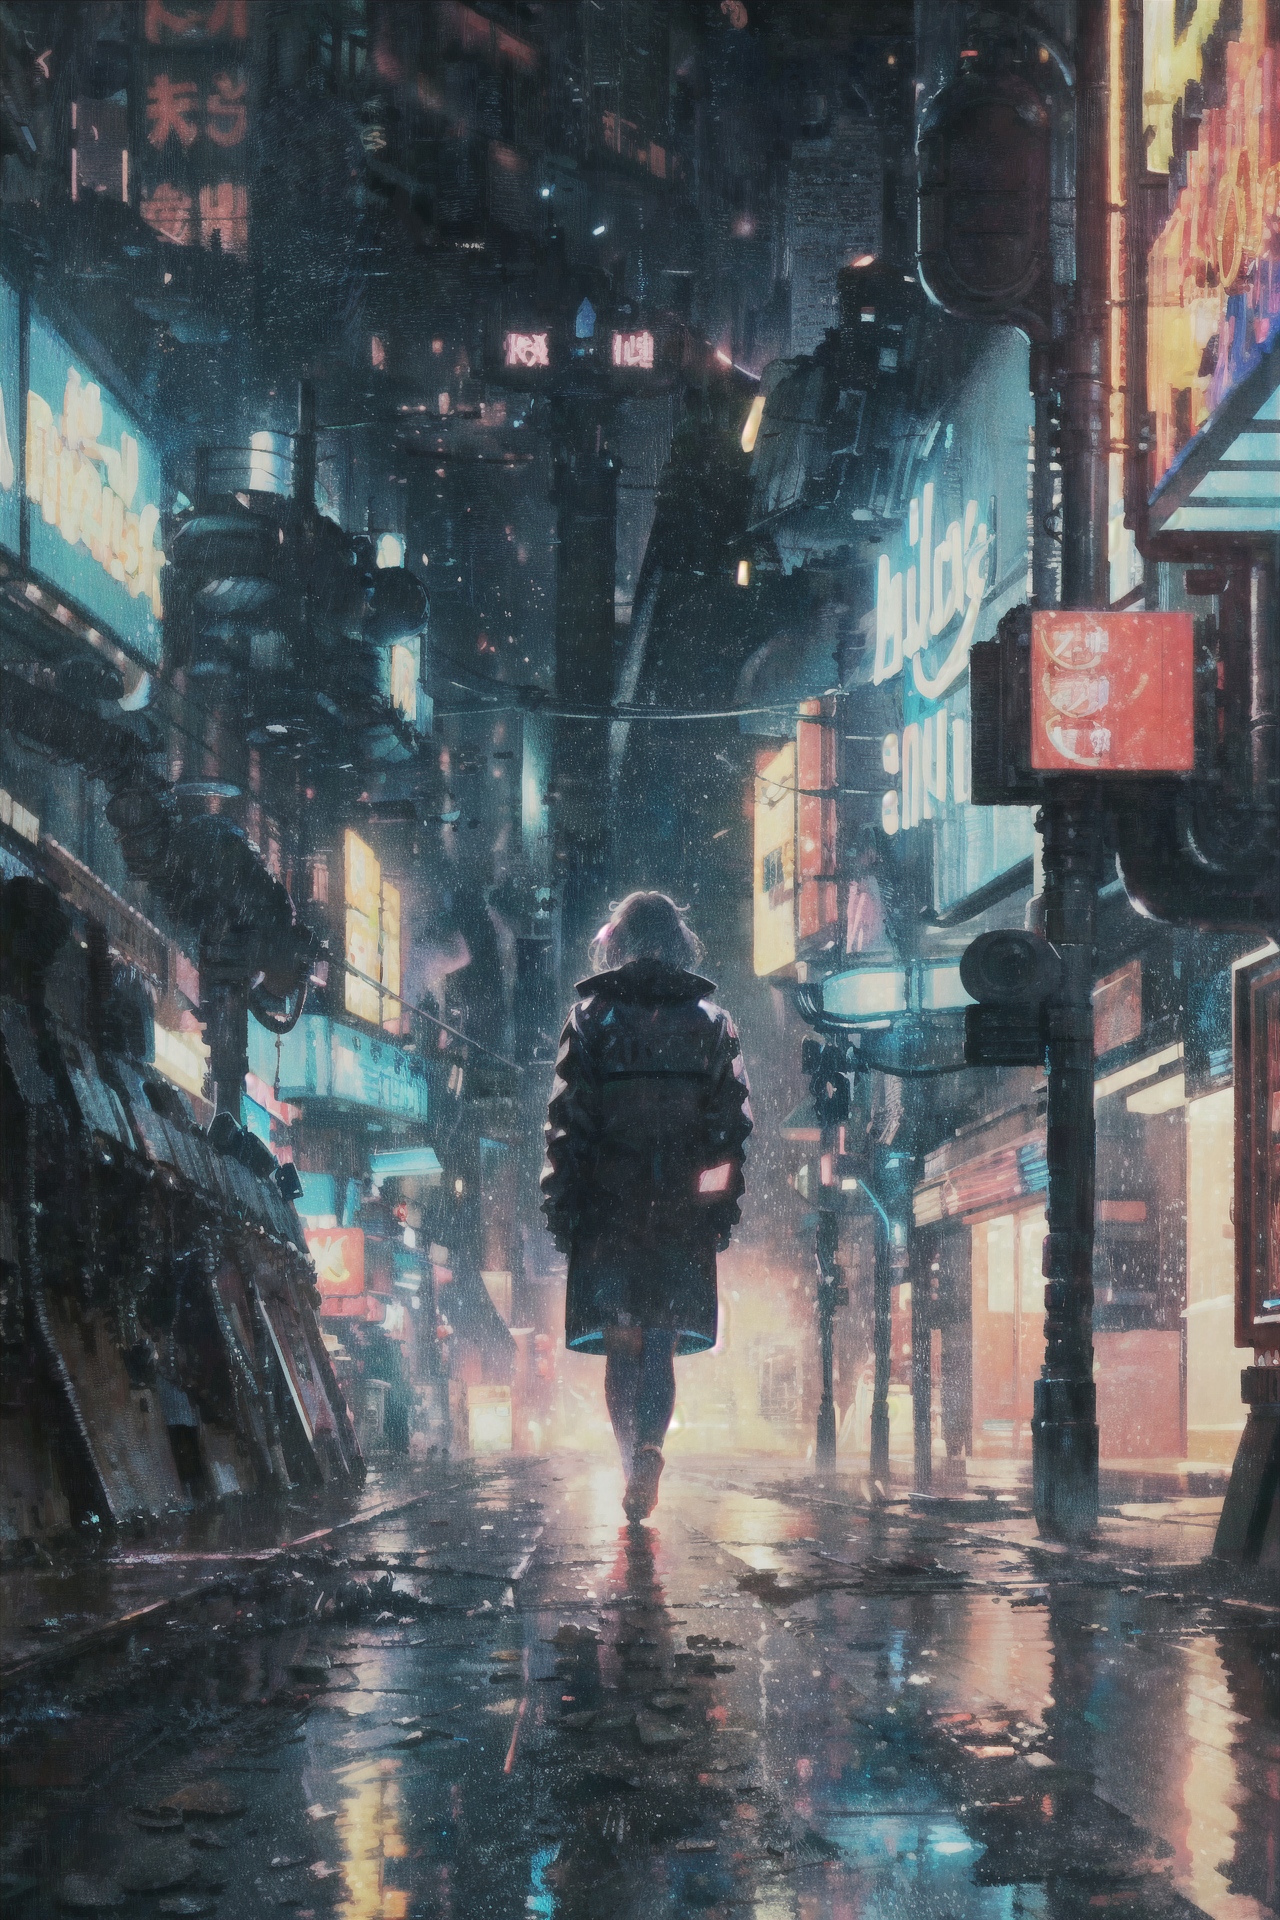 A woman walking alone in a large city at night.